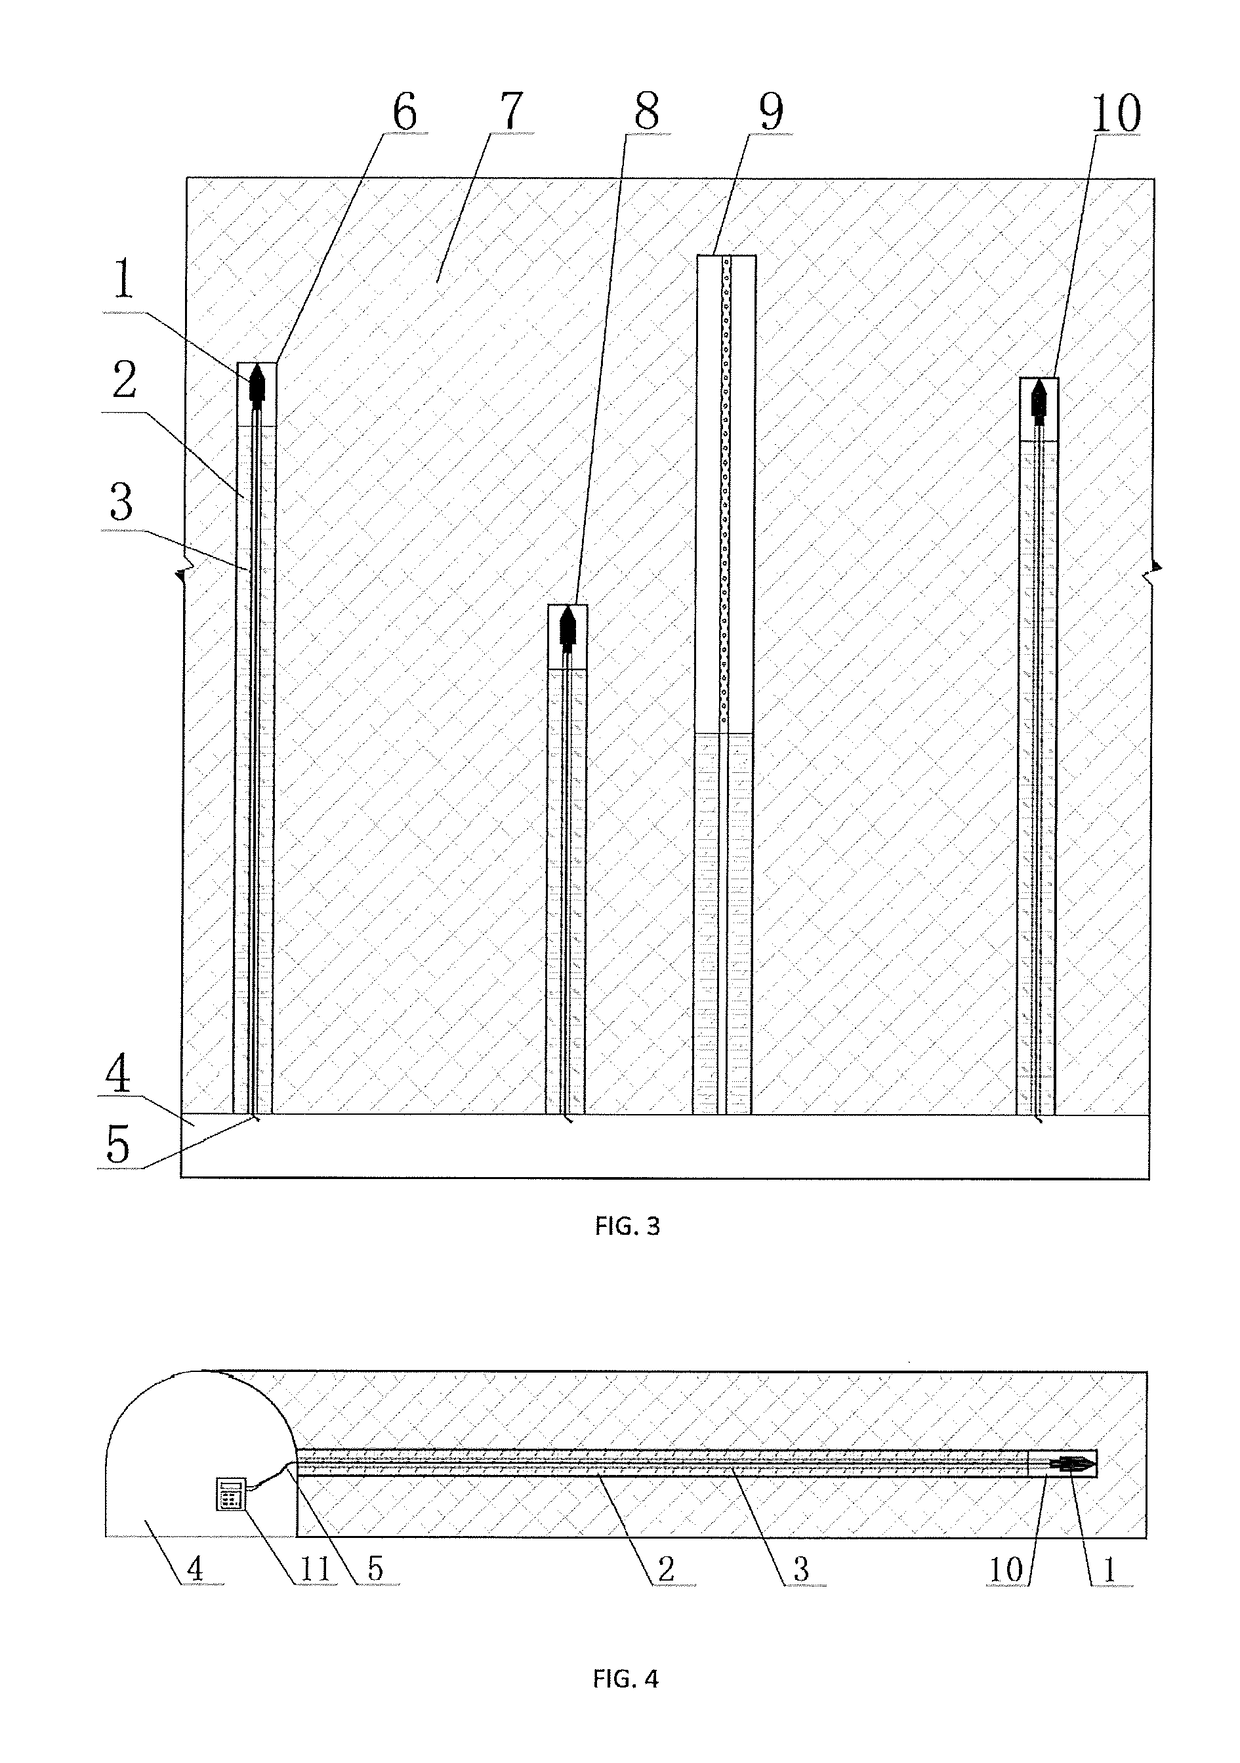 Test apparatus and a test method for the wetted perimeter of coal seam water injection